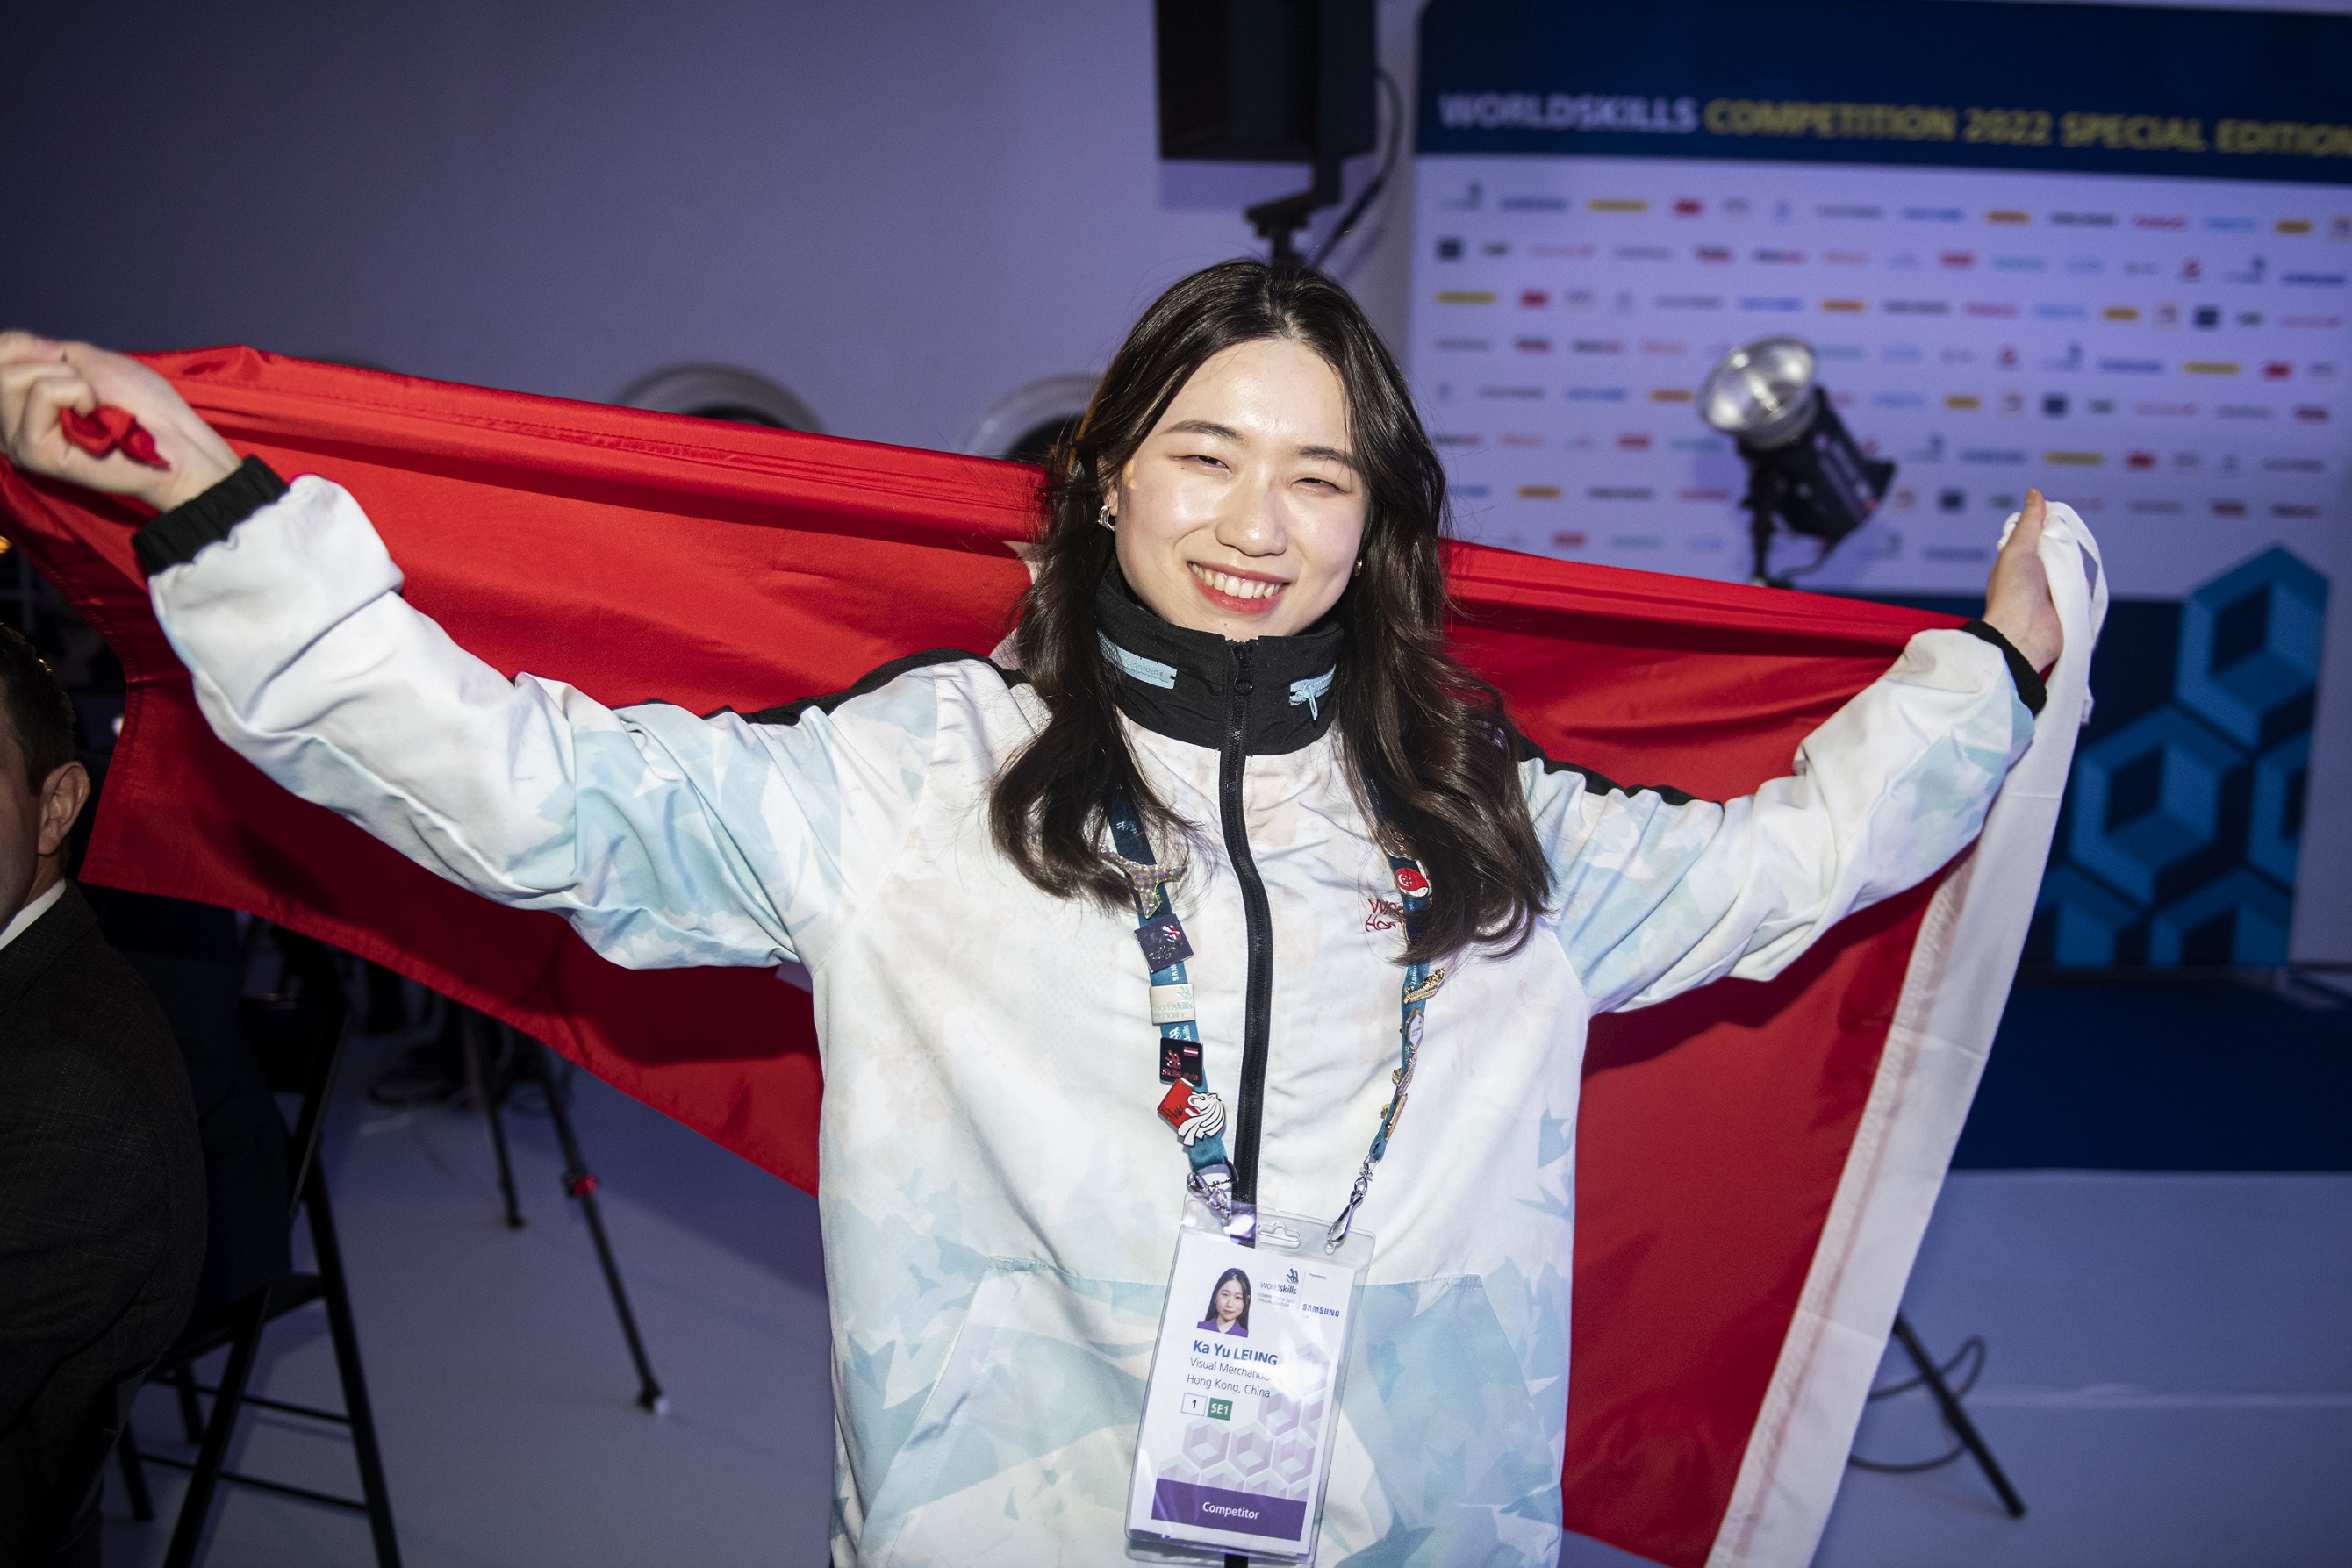 LEUNG Ka-yu, competitor of the Visual Merchandising trade and the HKDI graduate of the Higher Diploma in Design for Event, Exhibition and Performance programme, won the third Gold Medal of Team Hong Kong in history. (Photo credit: WorldSkills International)